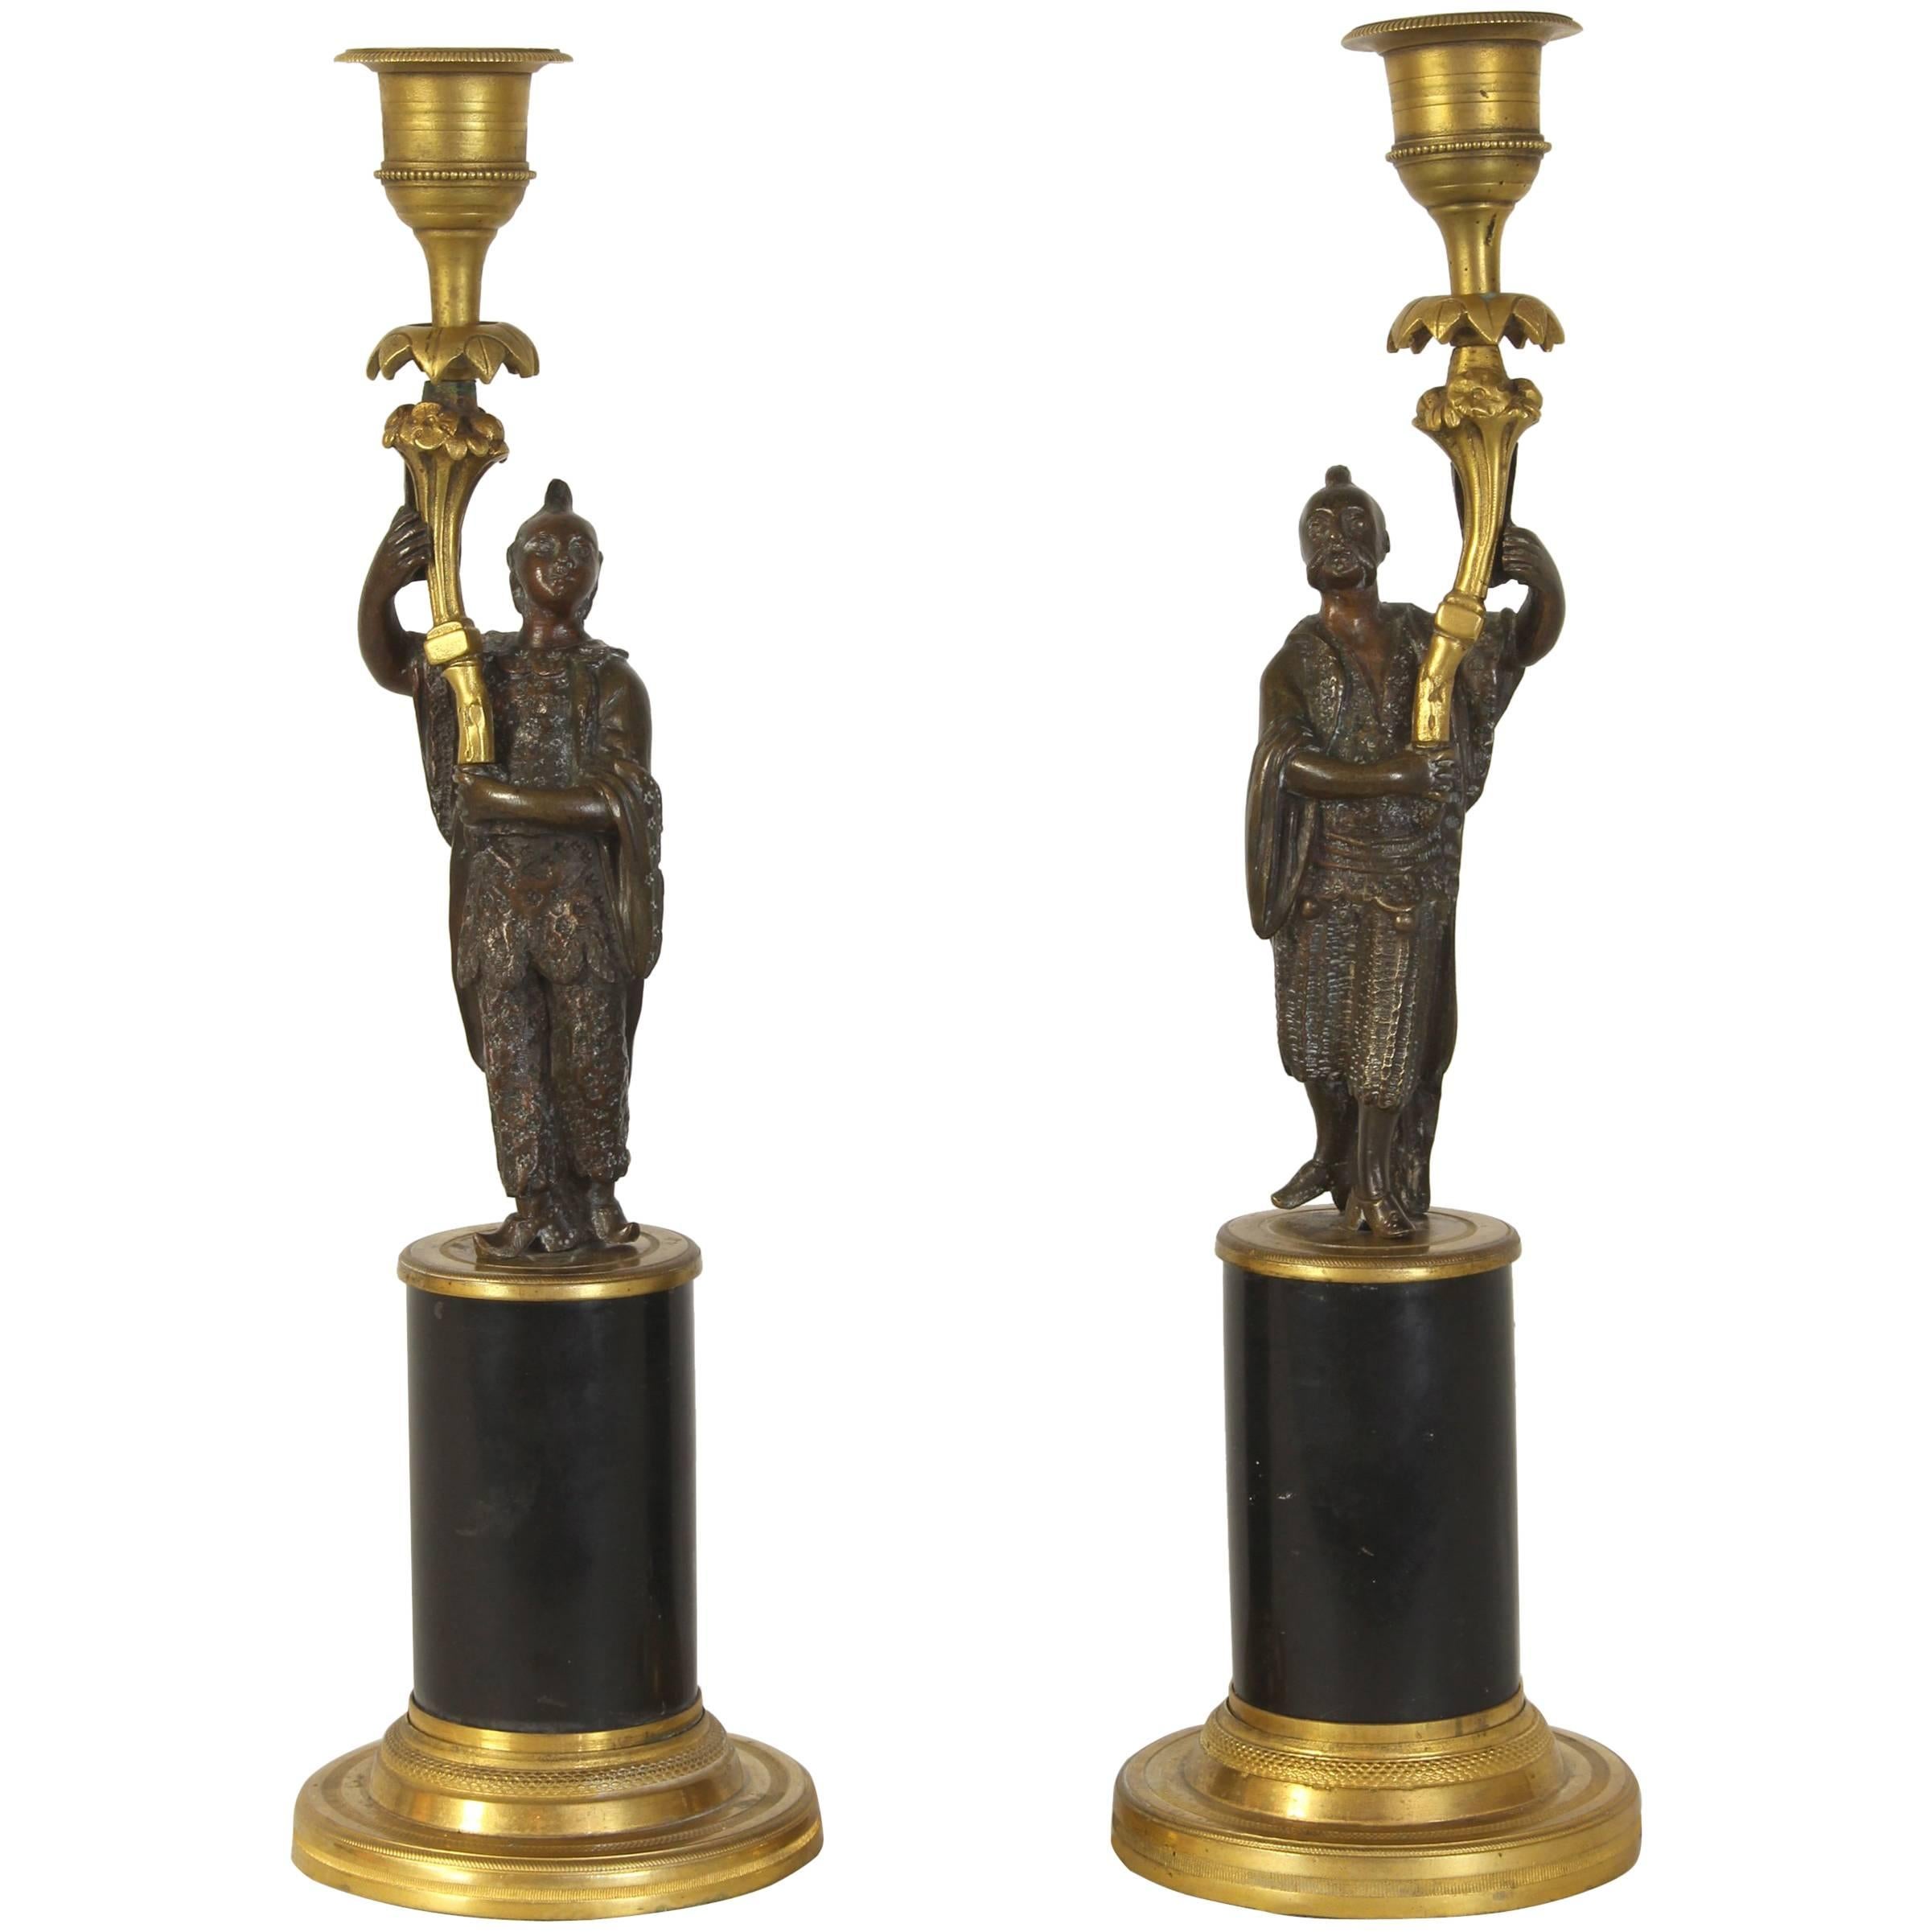 Pair of Early 19th Century Chinoiserie Figural Candlesticks For Sale